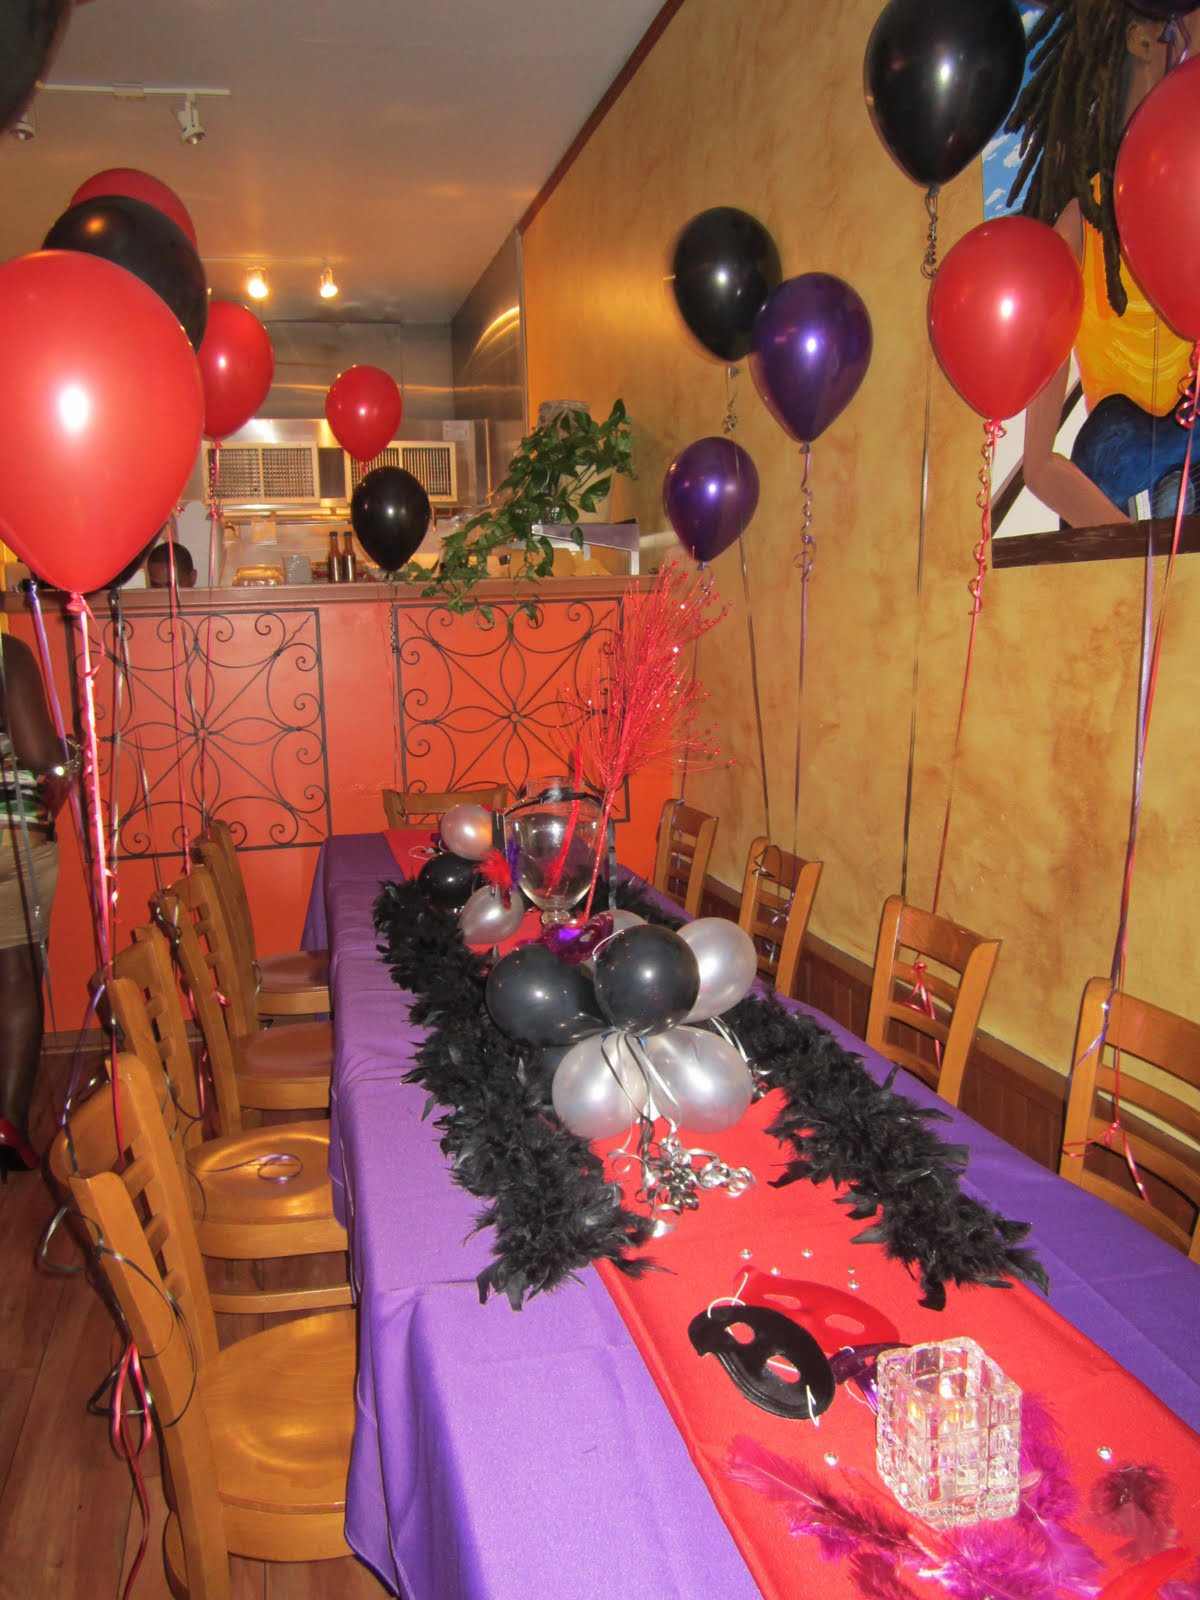 How To Decorate Birthday Party
 How To Decorate a Birthday Dinner Red Purple & Black